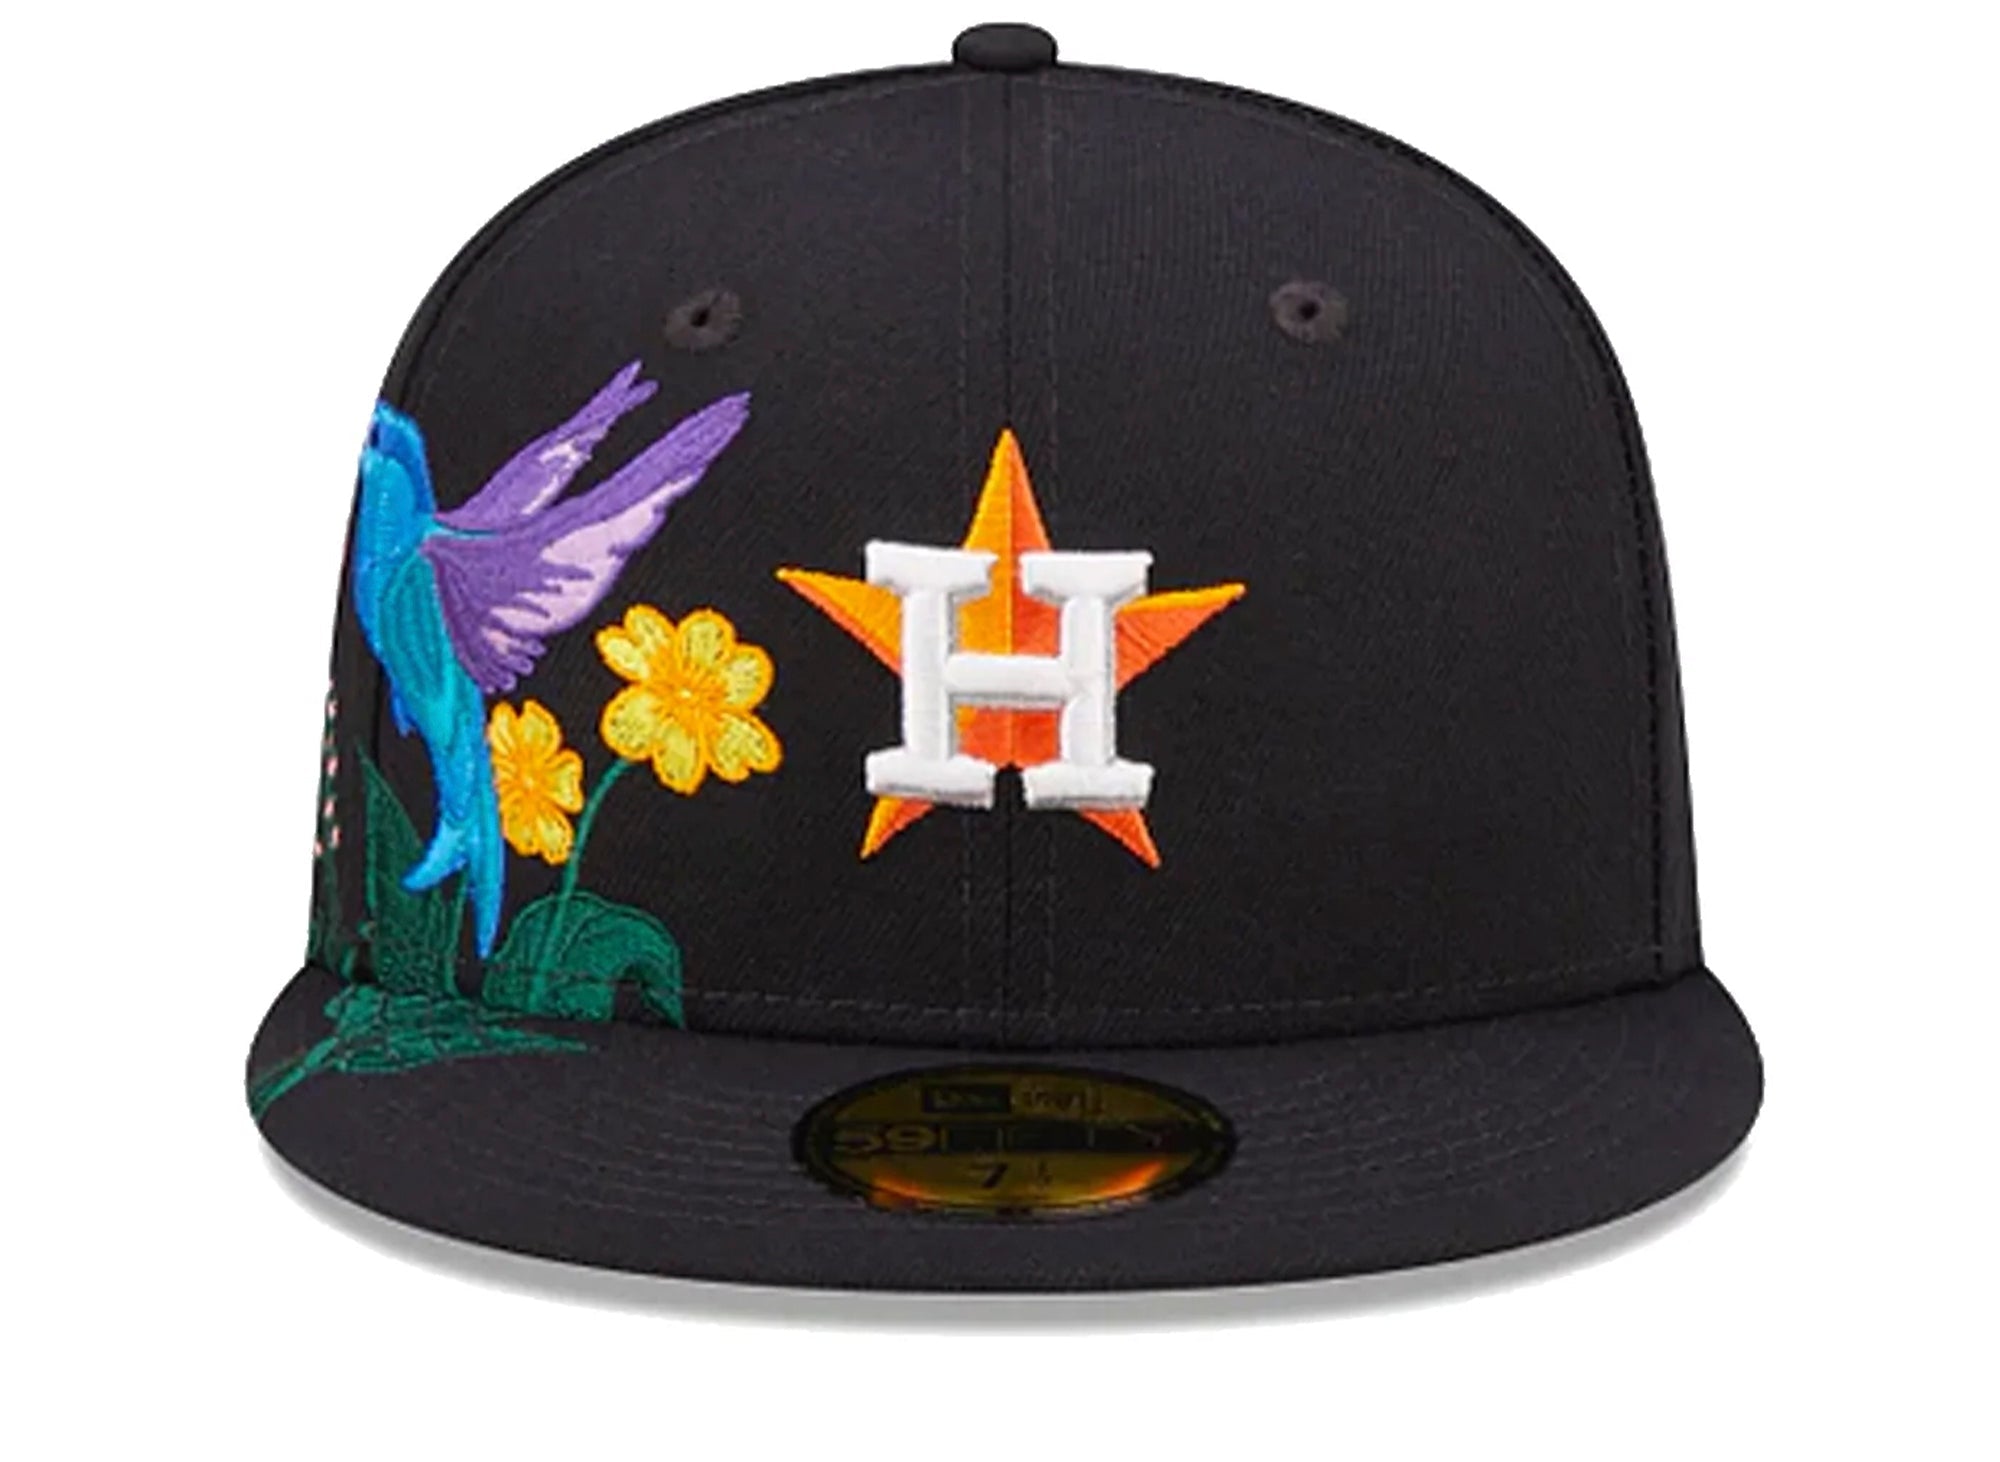 astros caps and shirts